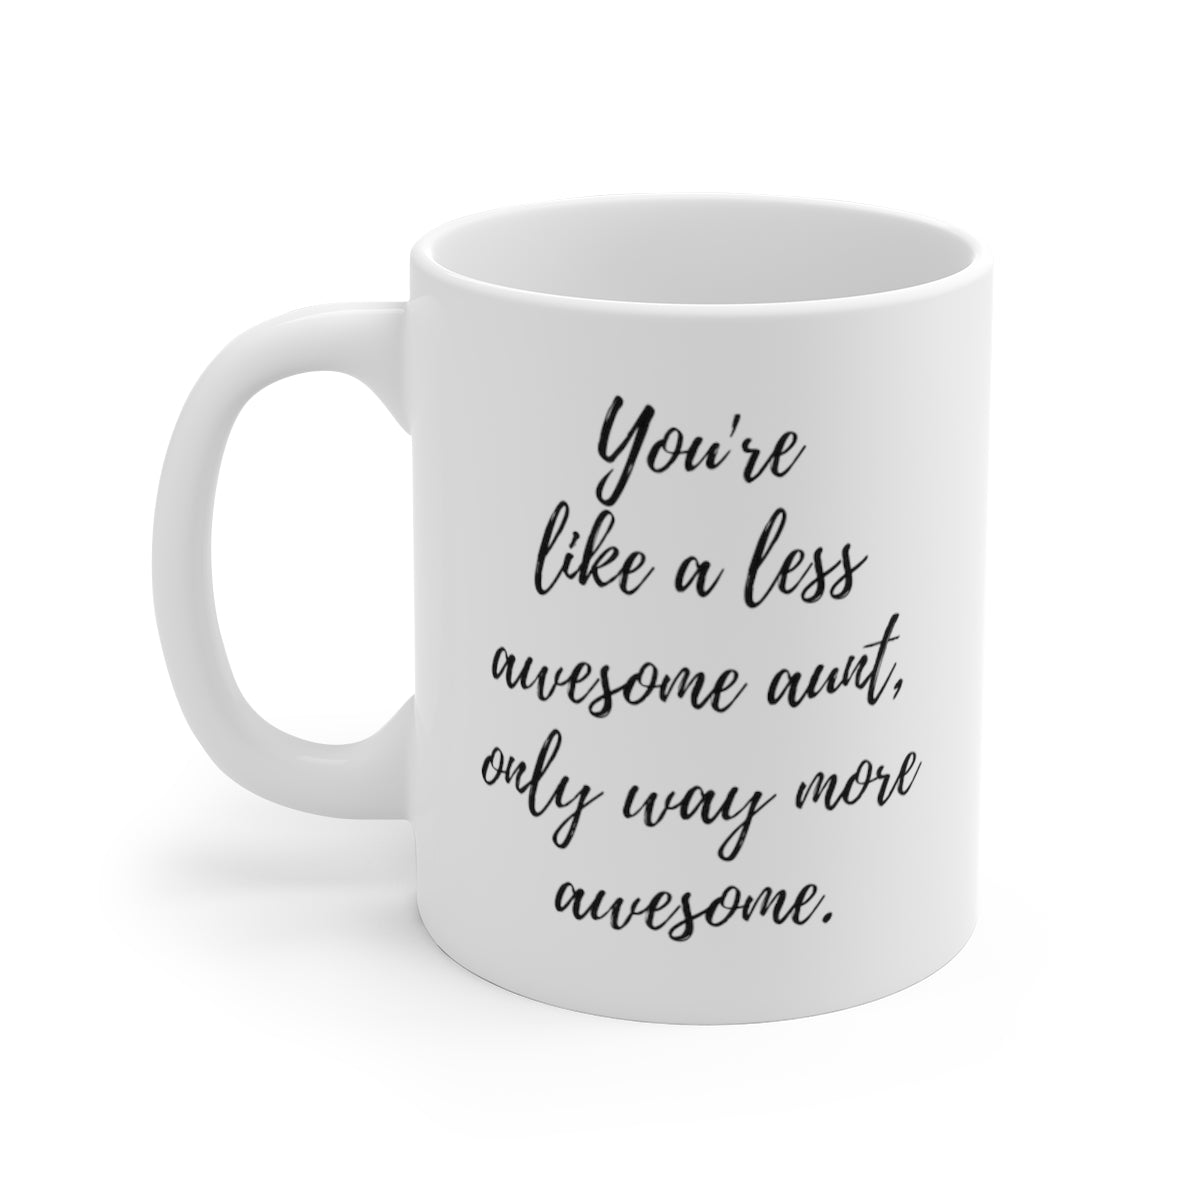 You're Like A Less Awesome Aunt, Only Way More Awesome | Funny, Snarky Gift | White Ceramic Mug, Script Font